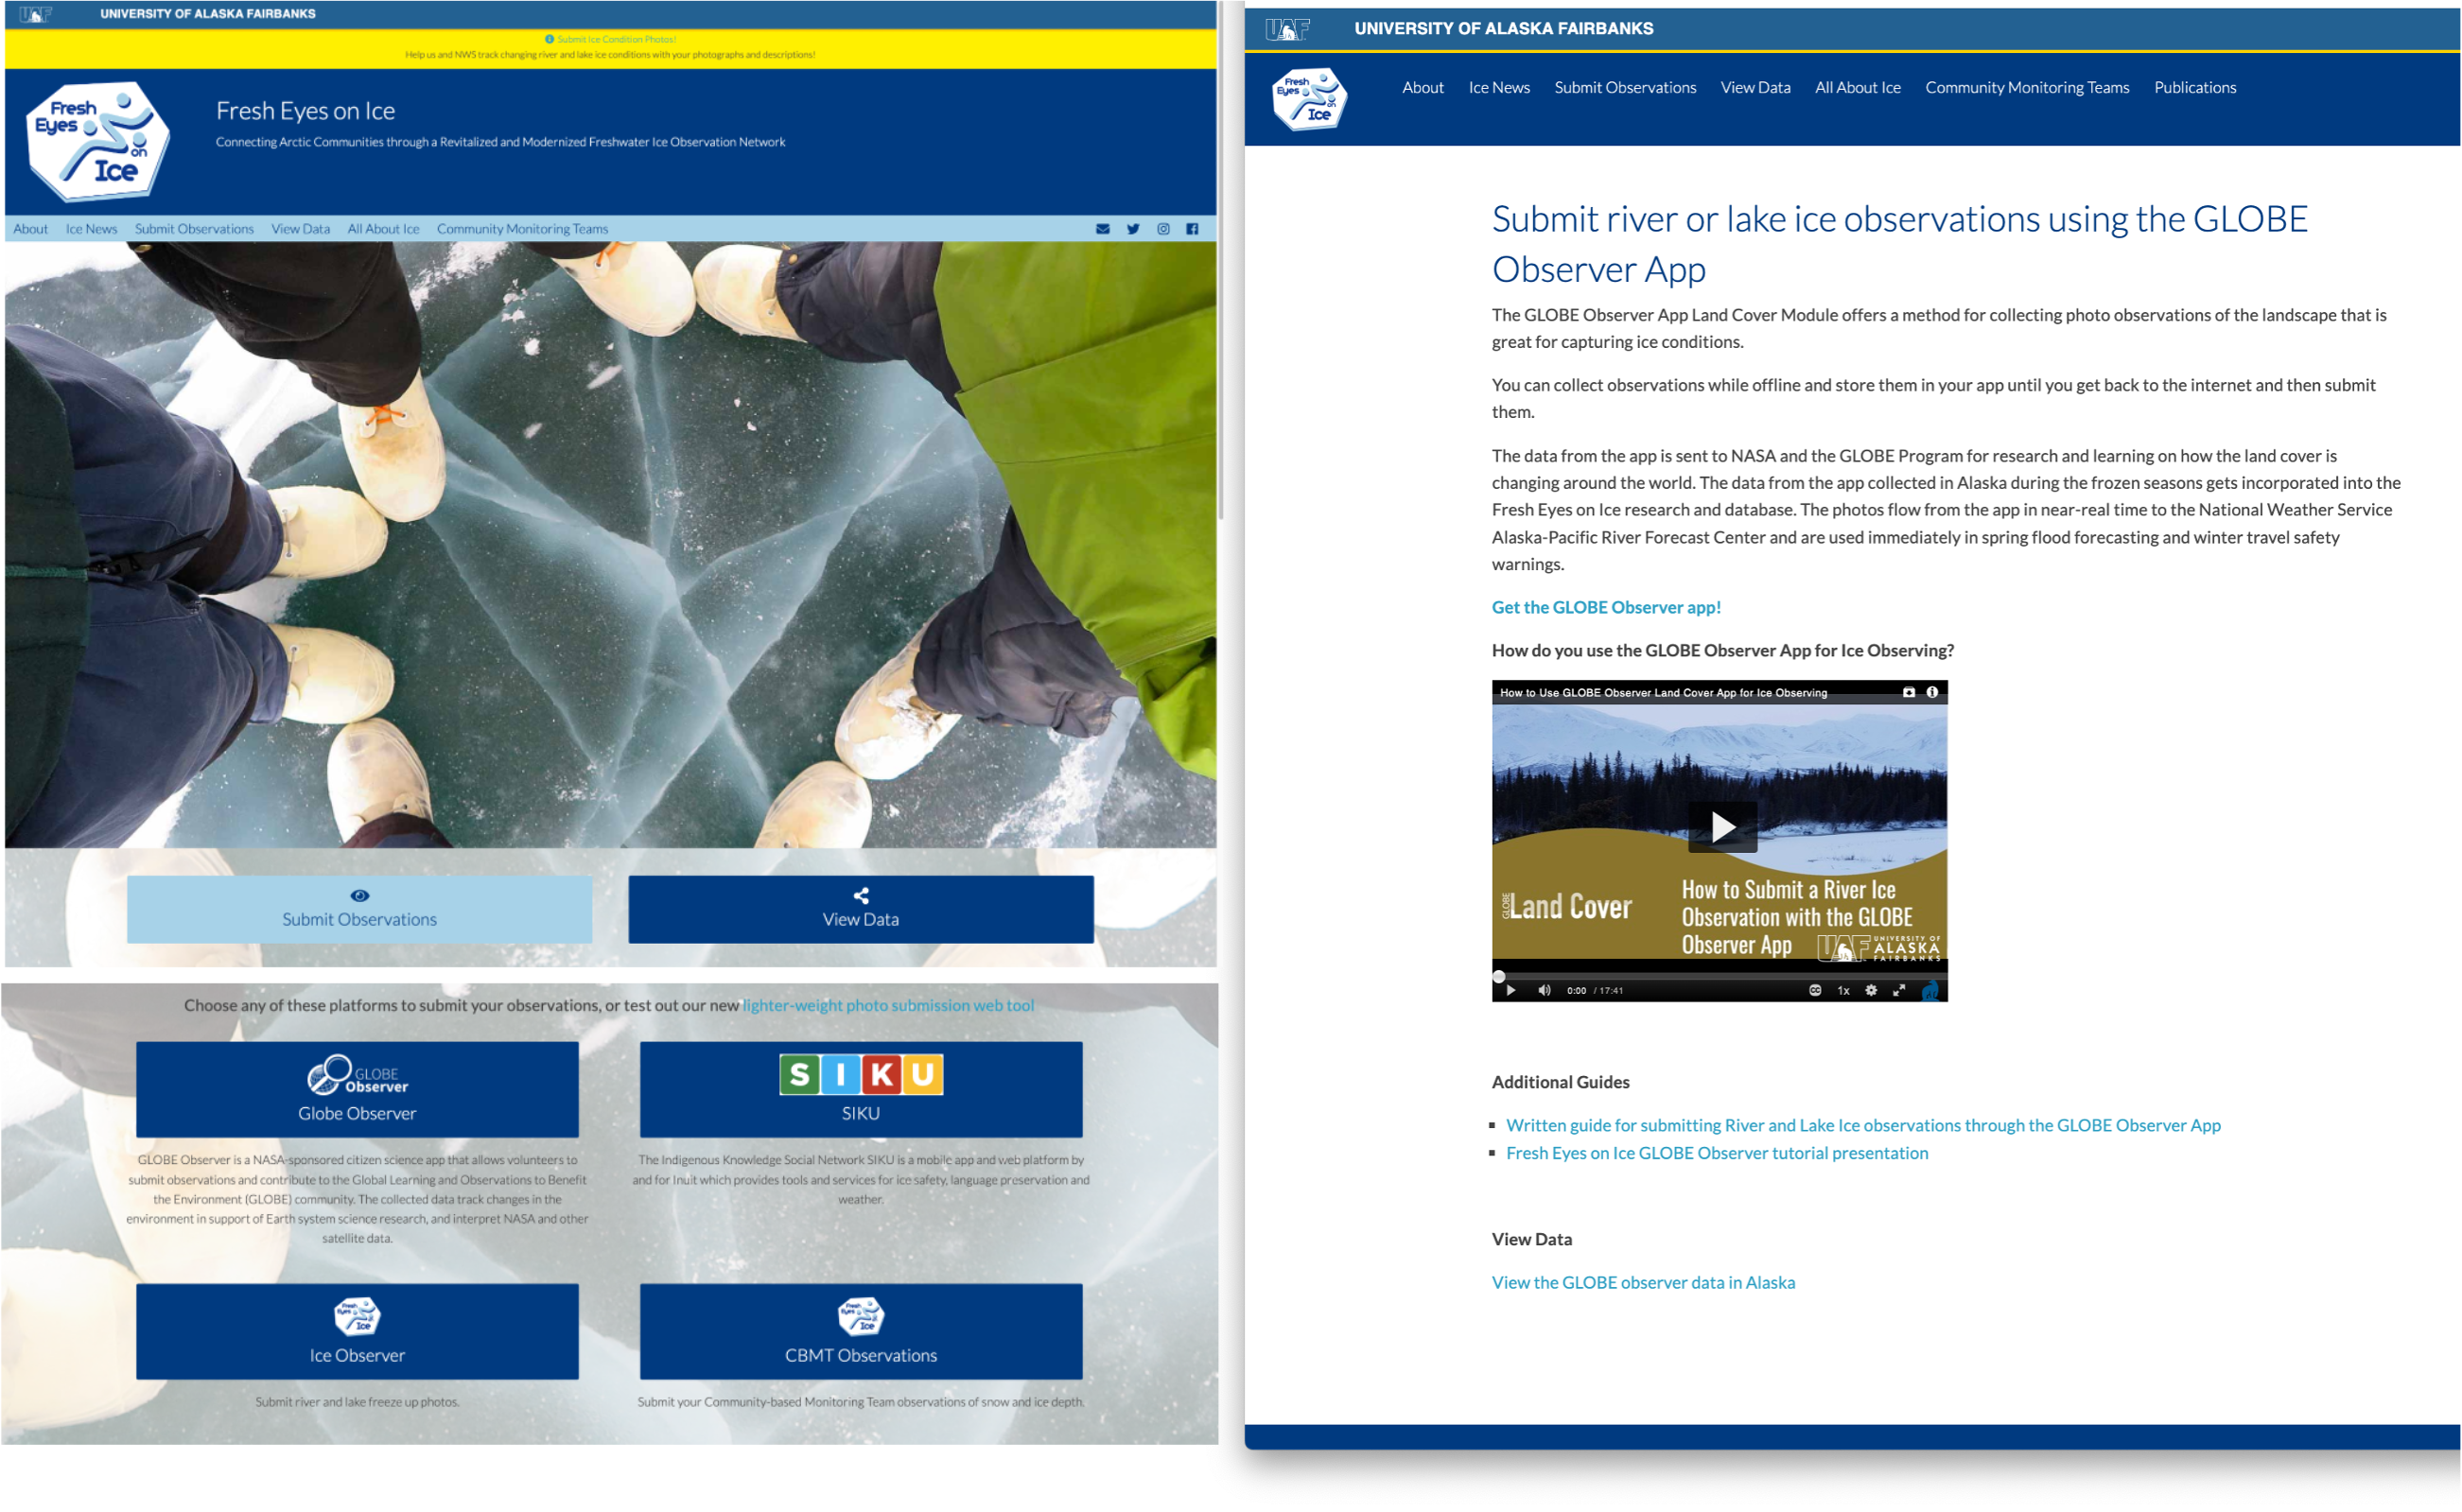 Screenshots of the Fresh Eyes on River Ice web page, including the home page at fresh eyes on ice dot org and a sub-page about how to submit river or lake ice observations using the GLOBE Observer app. 